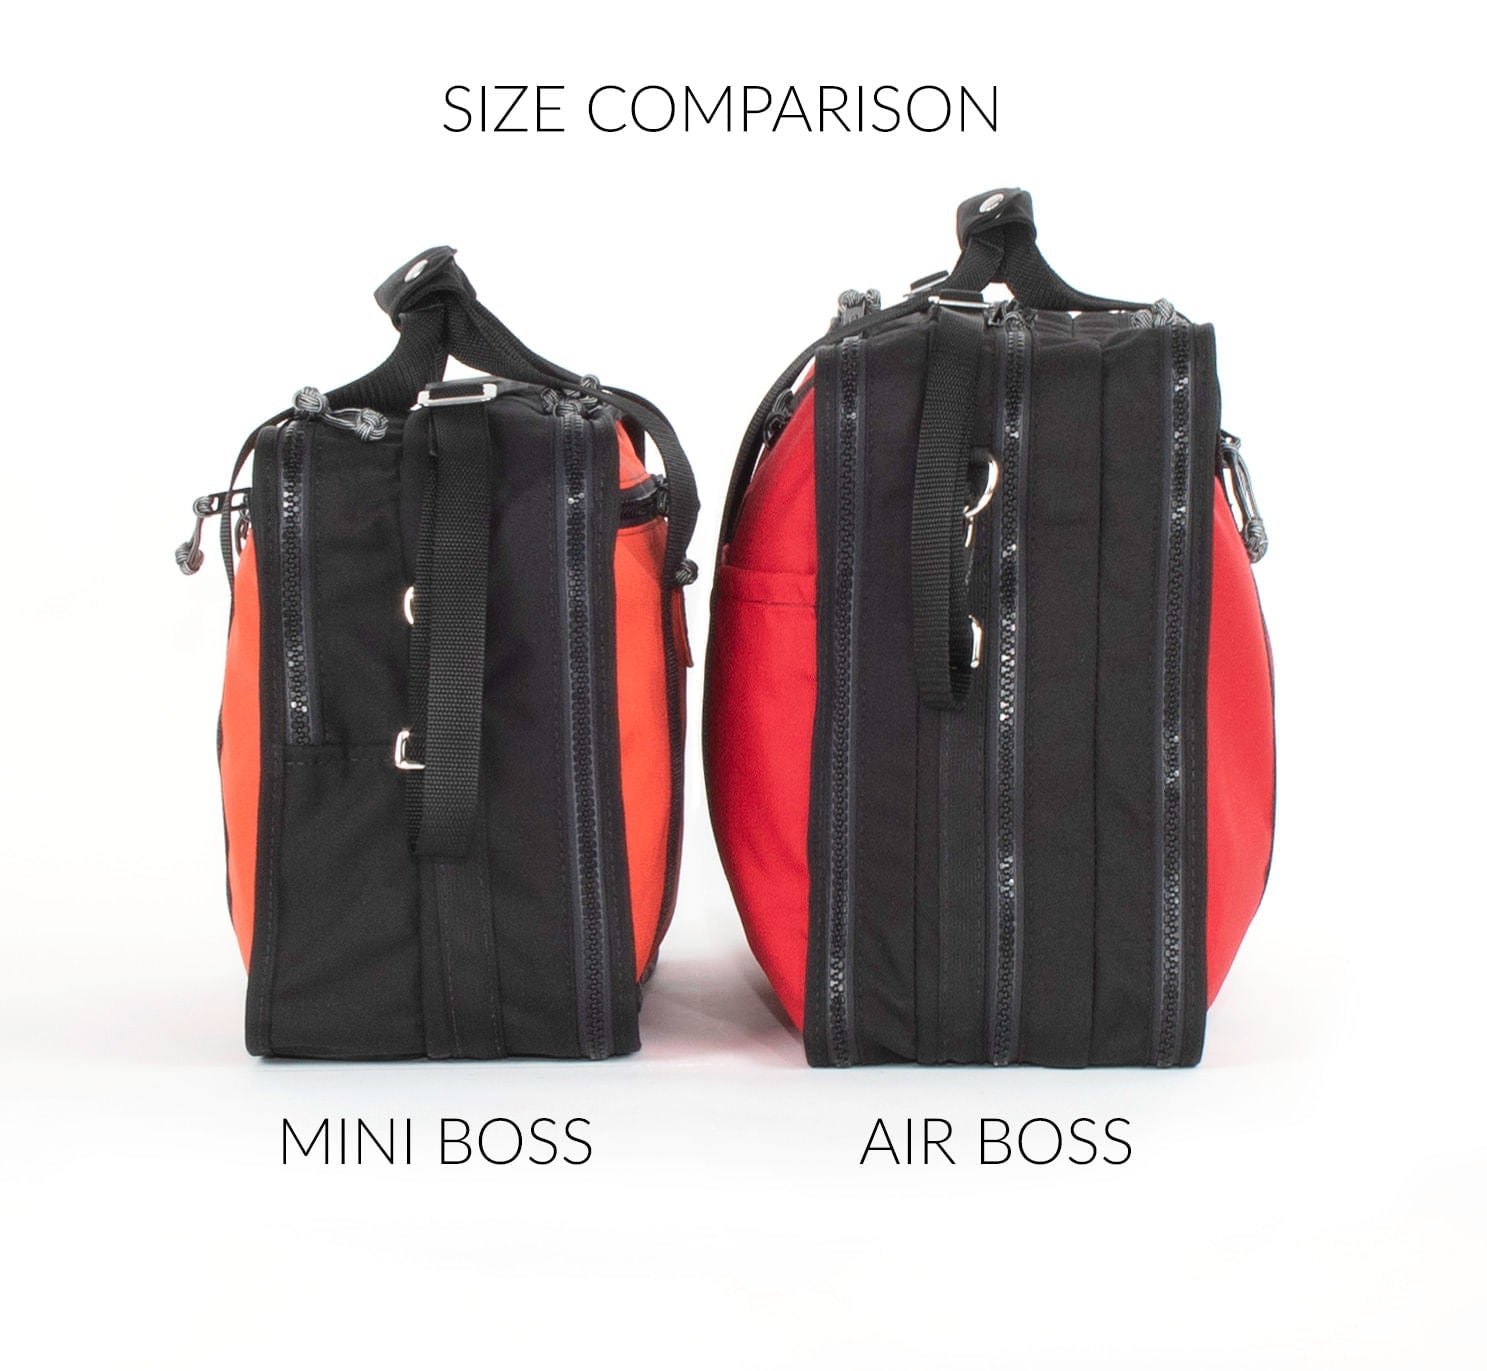 From left to right end view comparison of the Mini Boss to Air Boss.